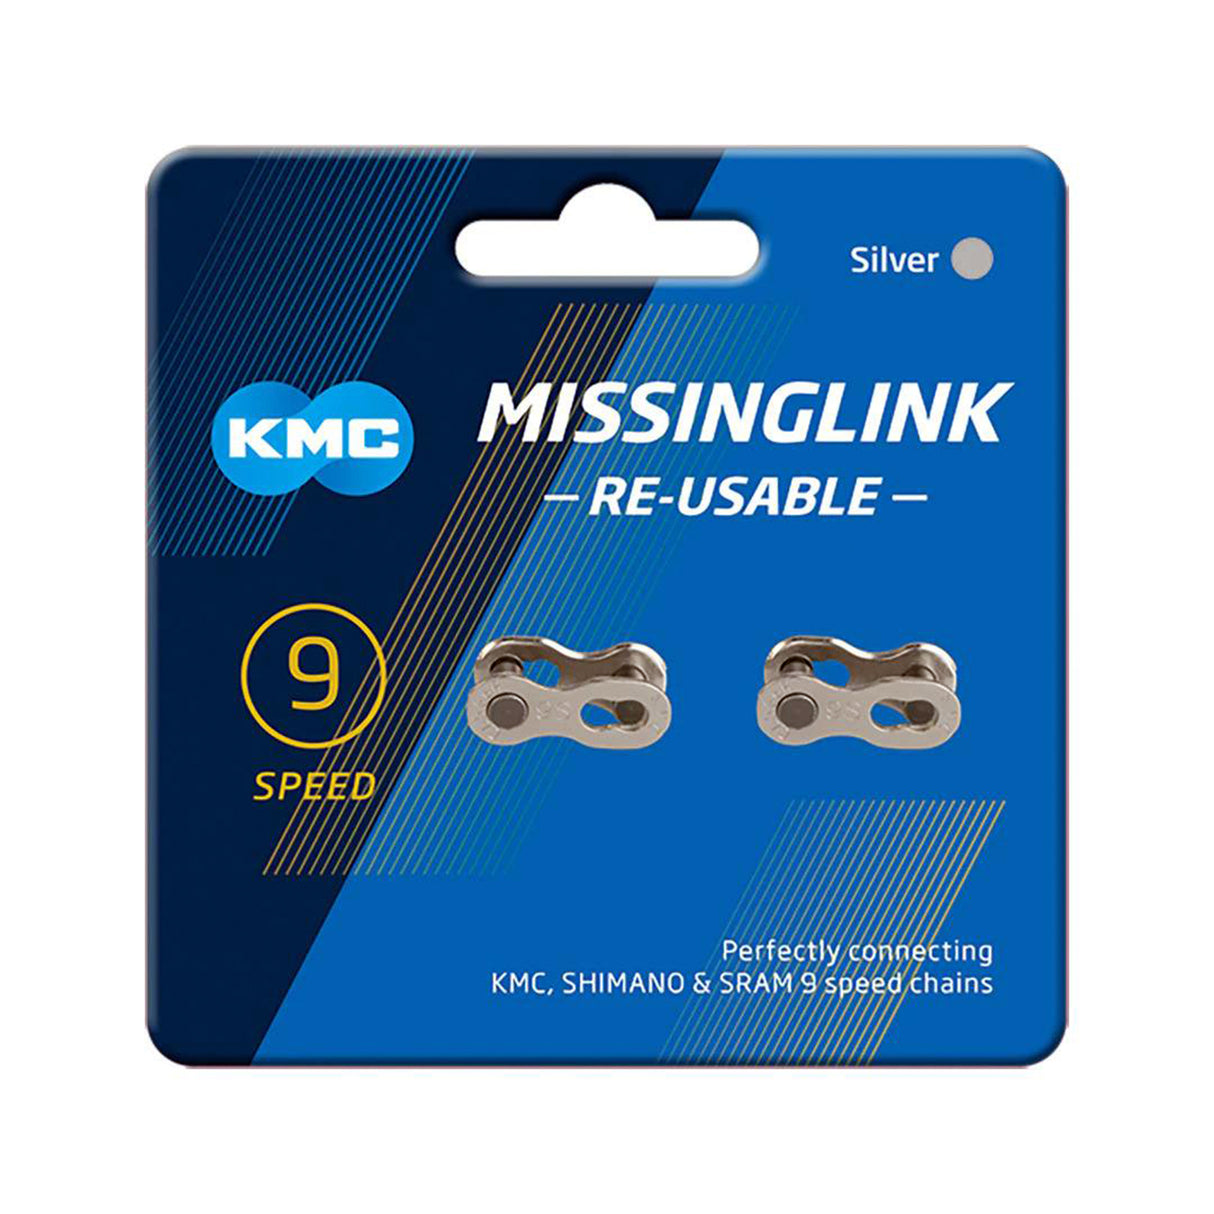 KMC CL566R Missing Link 9 Speed Silver 2 Pairs